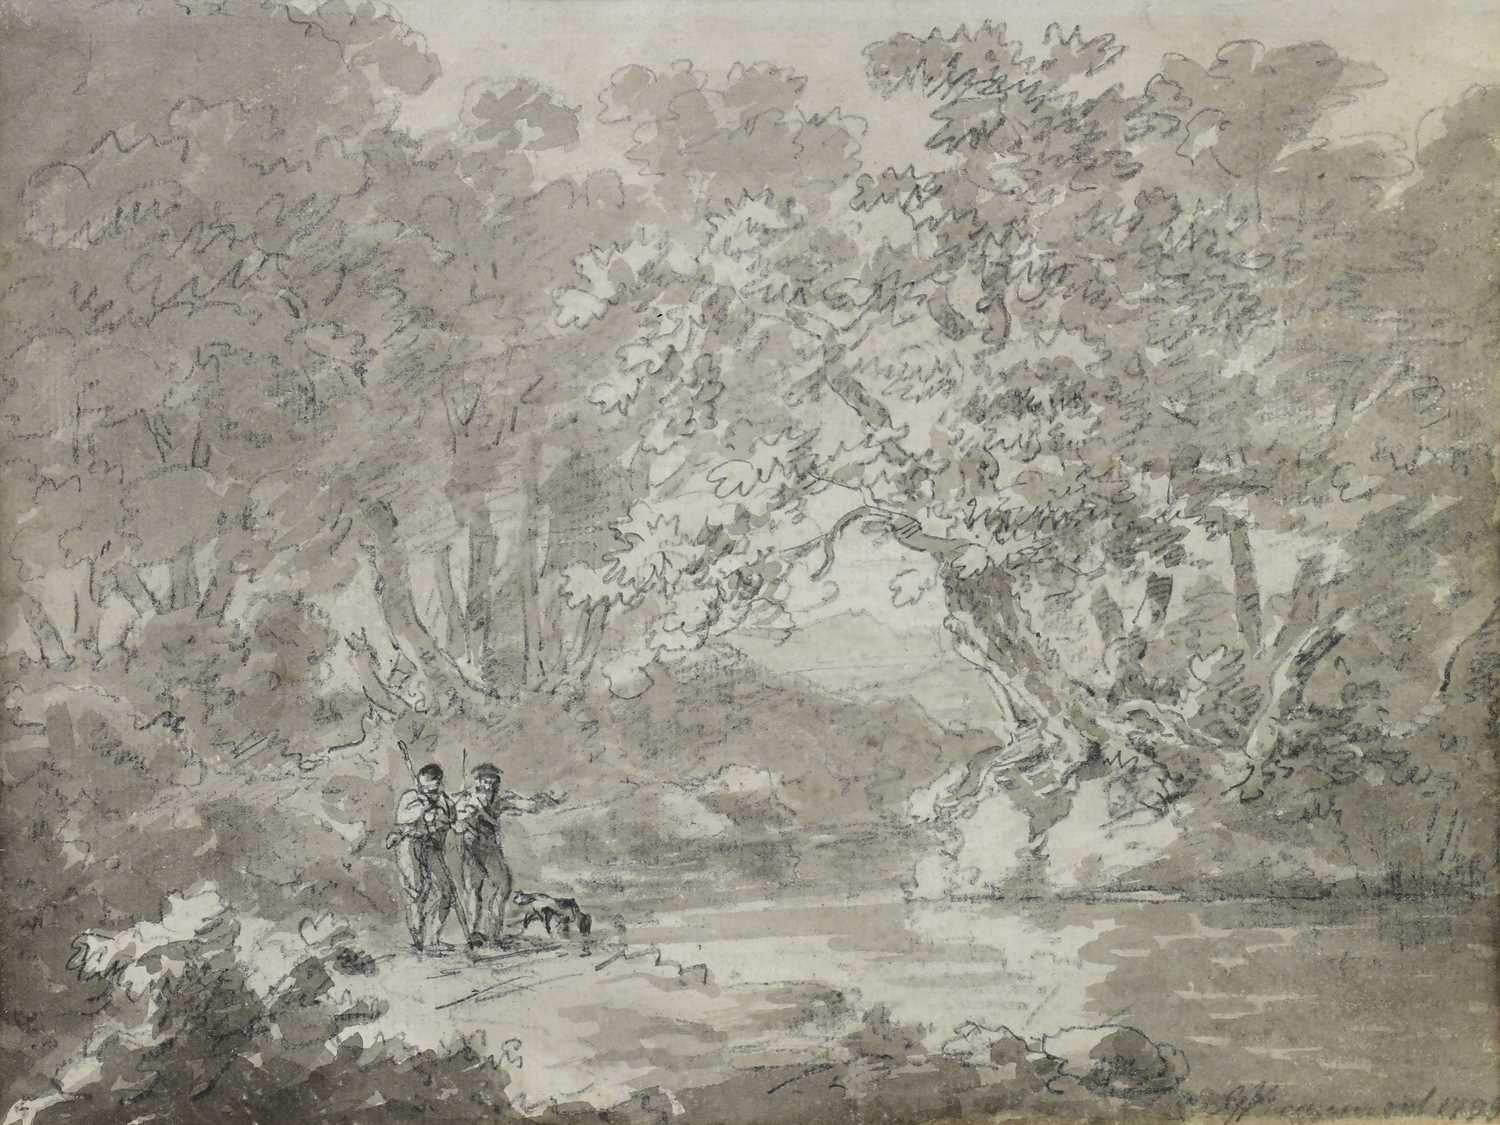 GEORGE HOWLAND BEAUMONT (1753-1827); monochrome watercolour, 'N. Aston, Friday December 6th 1799', - Image 2 of 3